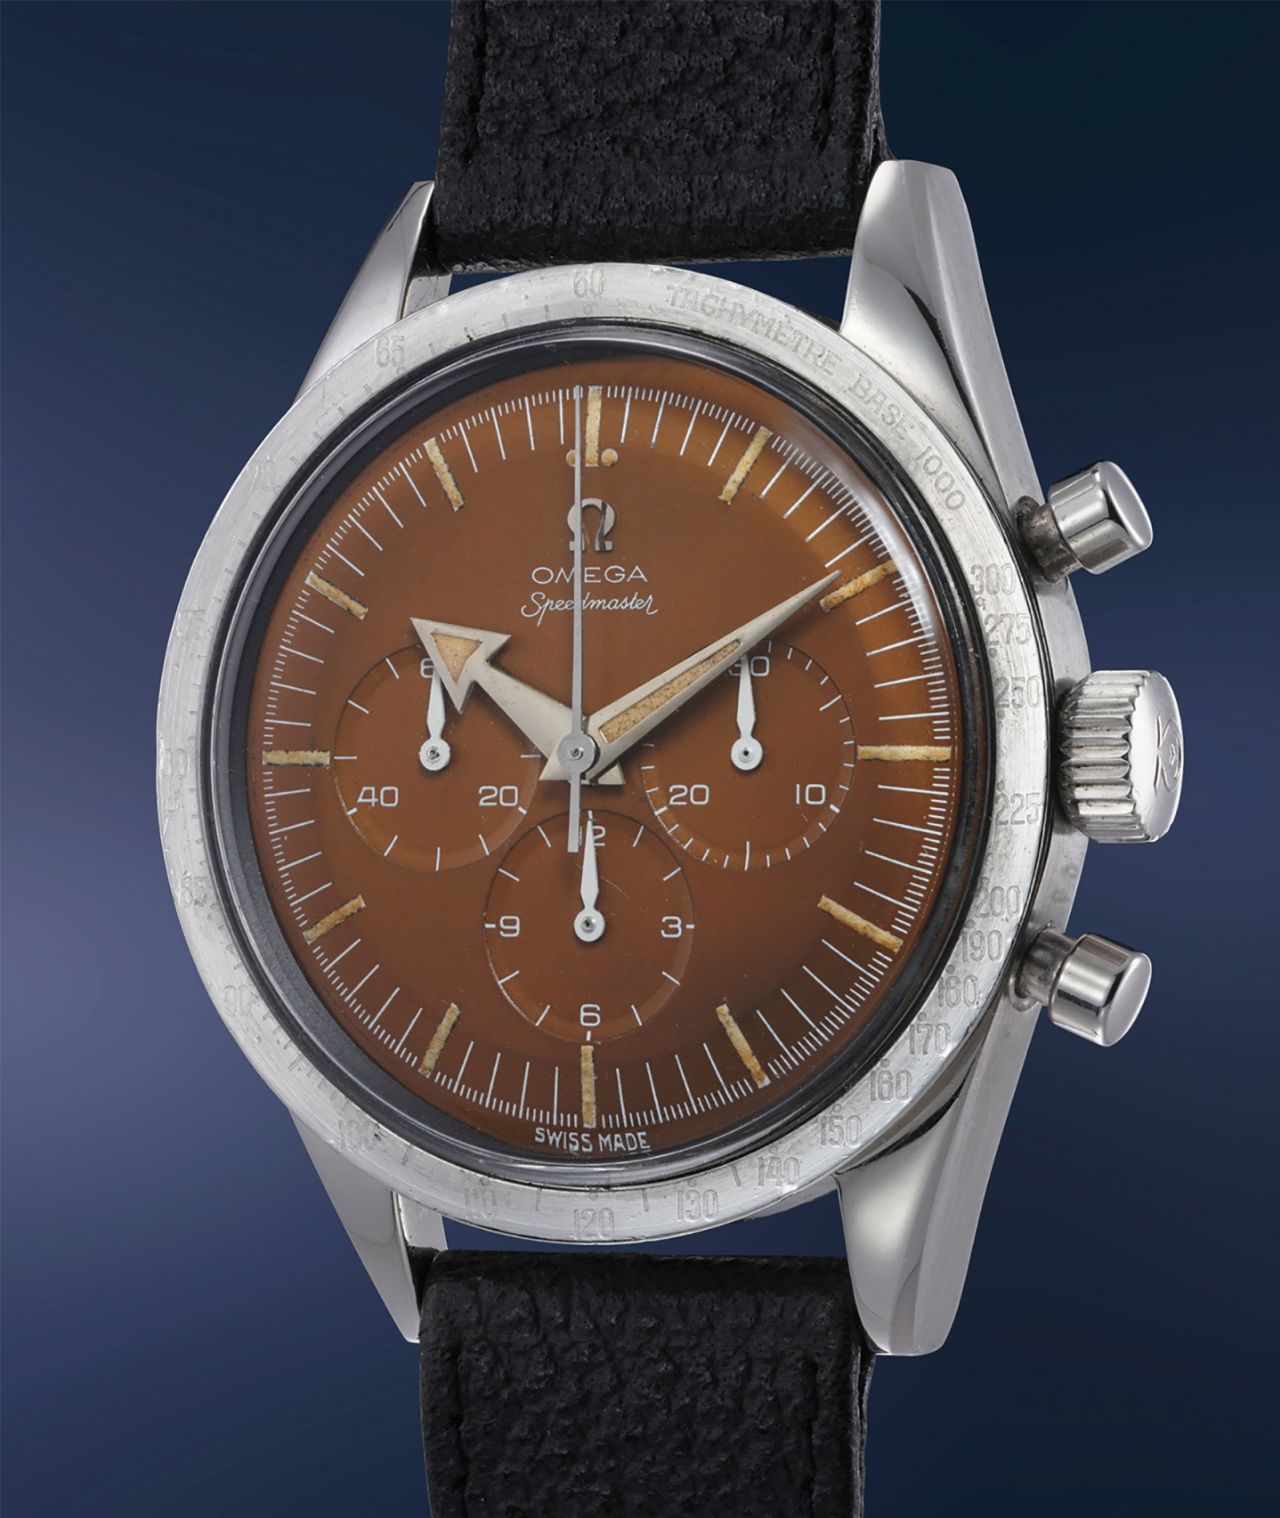 Omega Discovers $3.4 Million Fake Speedmaster Watch Sold